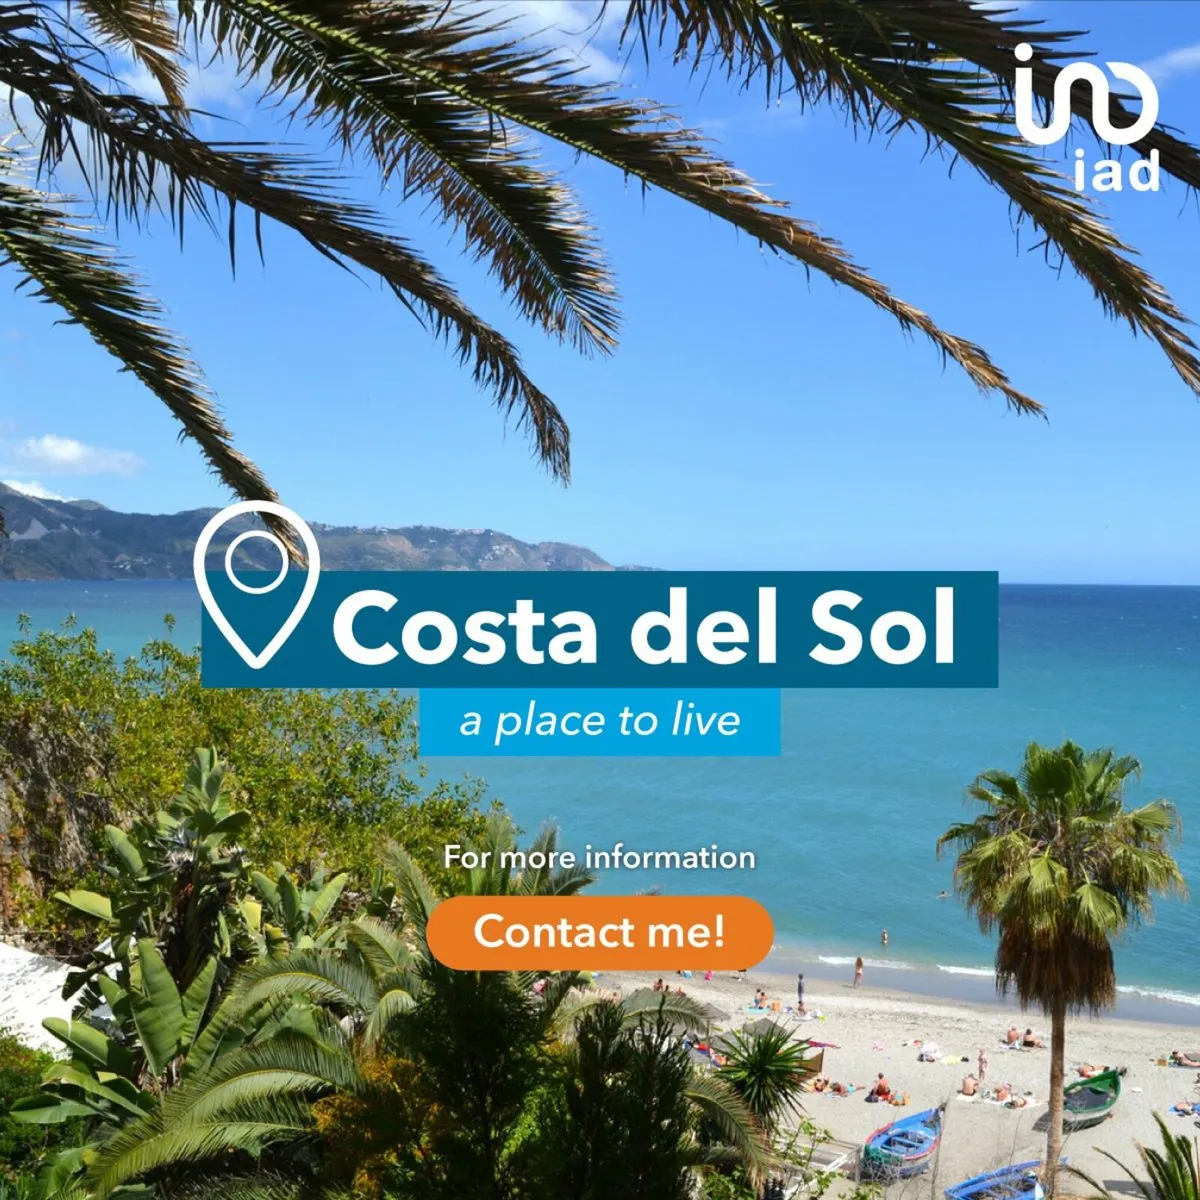 BYING OR SELLING ON THE COSTA DEL SOL ?